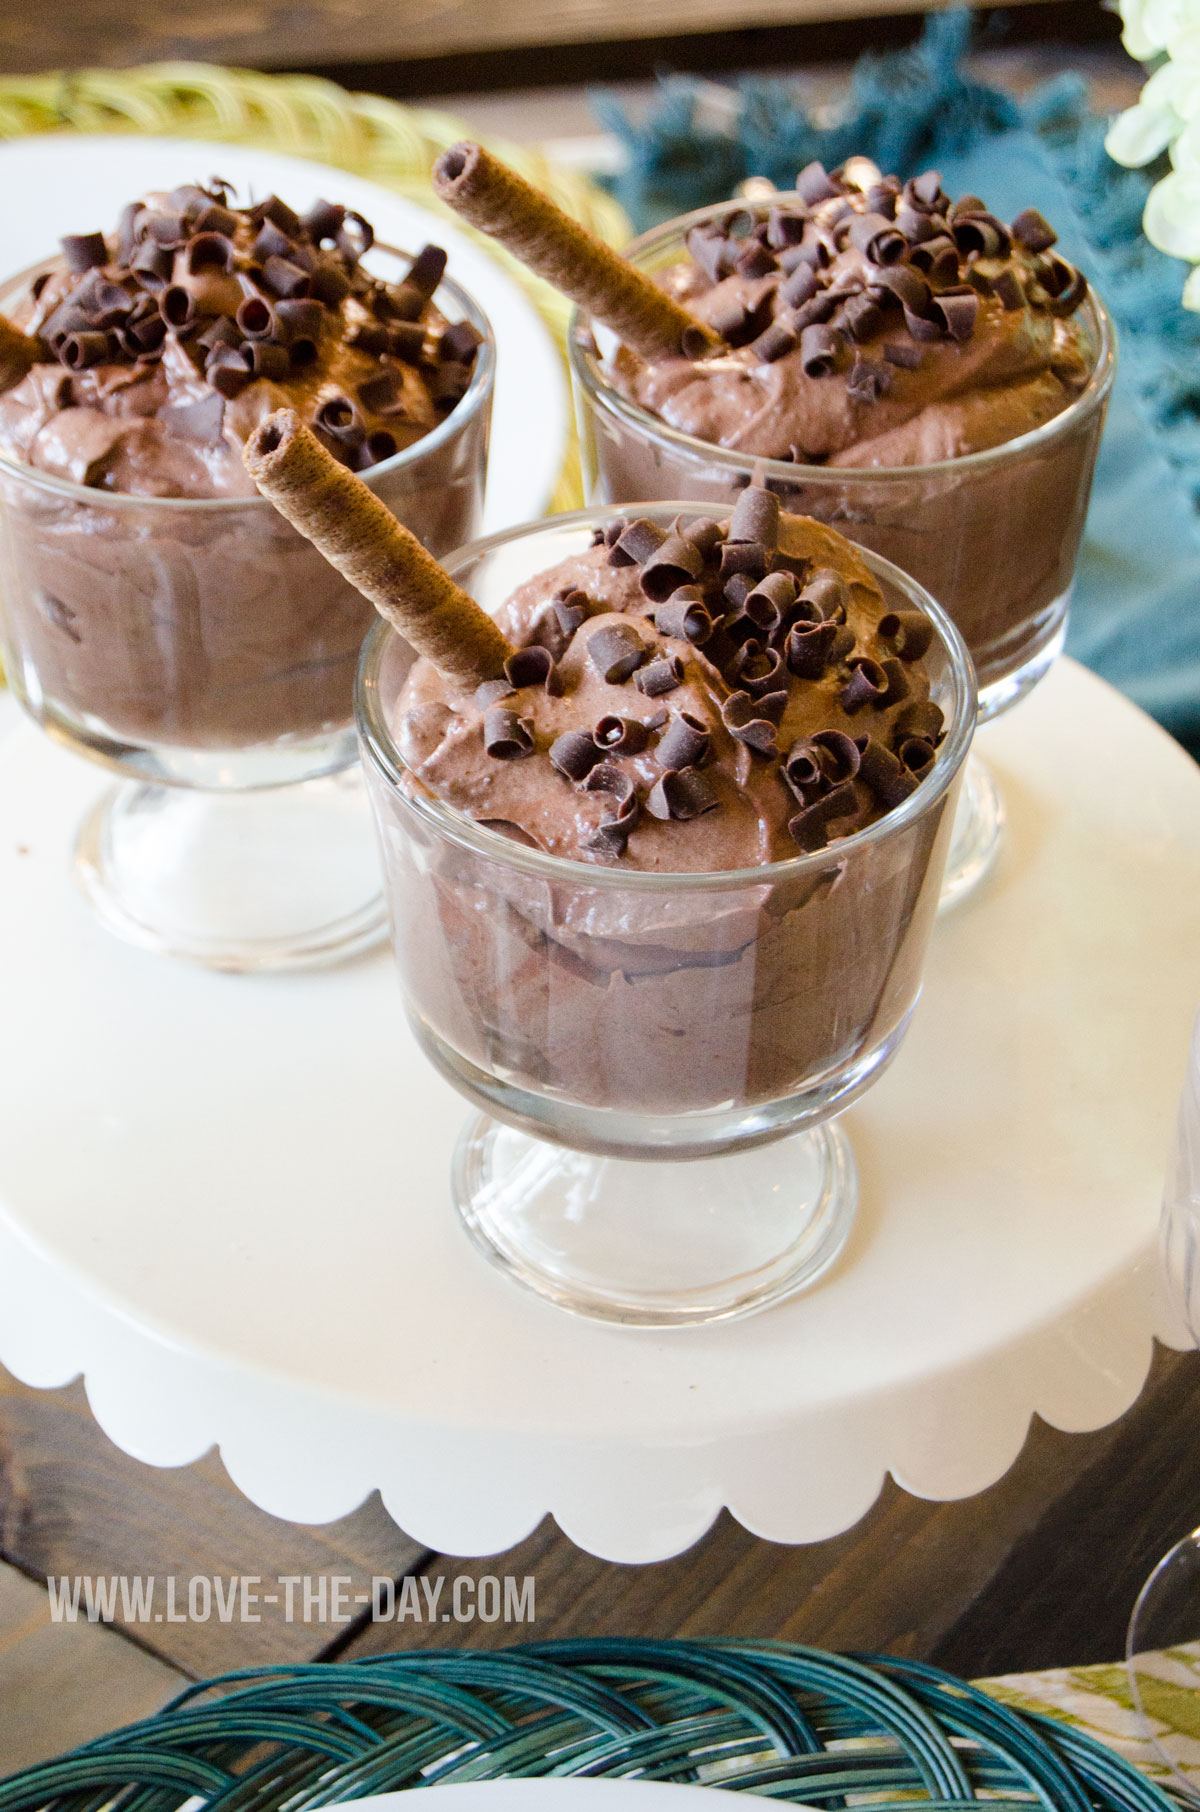 Mother's Day Brunch with World MarketChocolate Orange Mousse Recipe by Love The Day